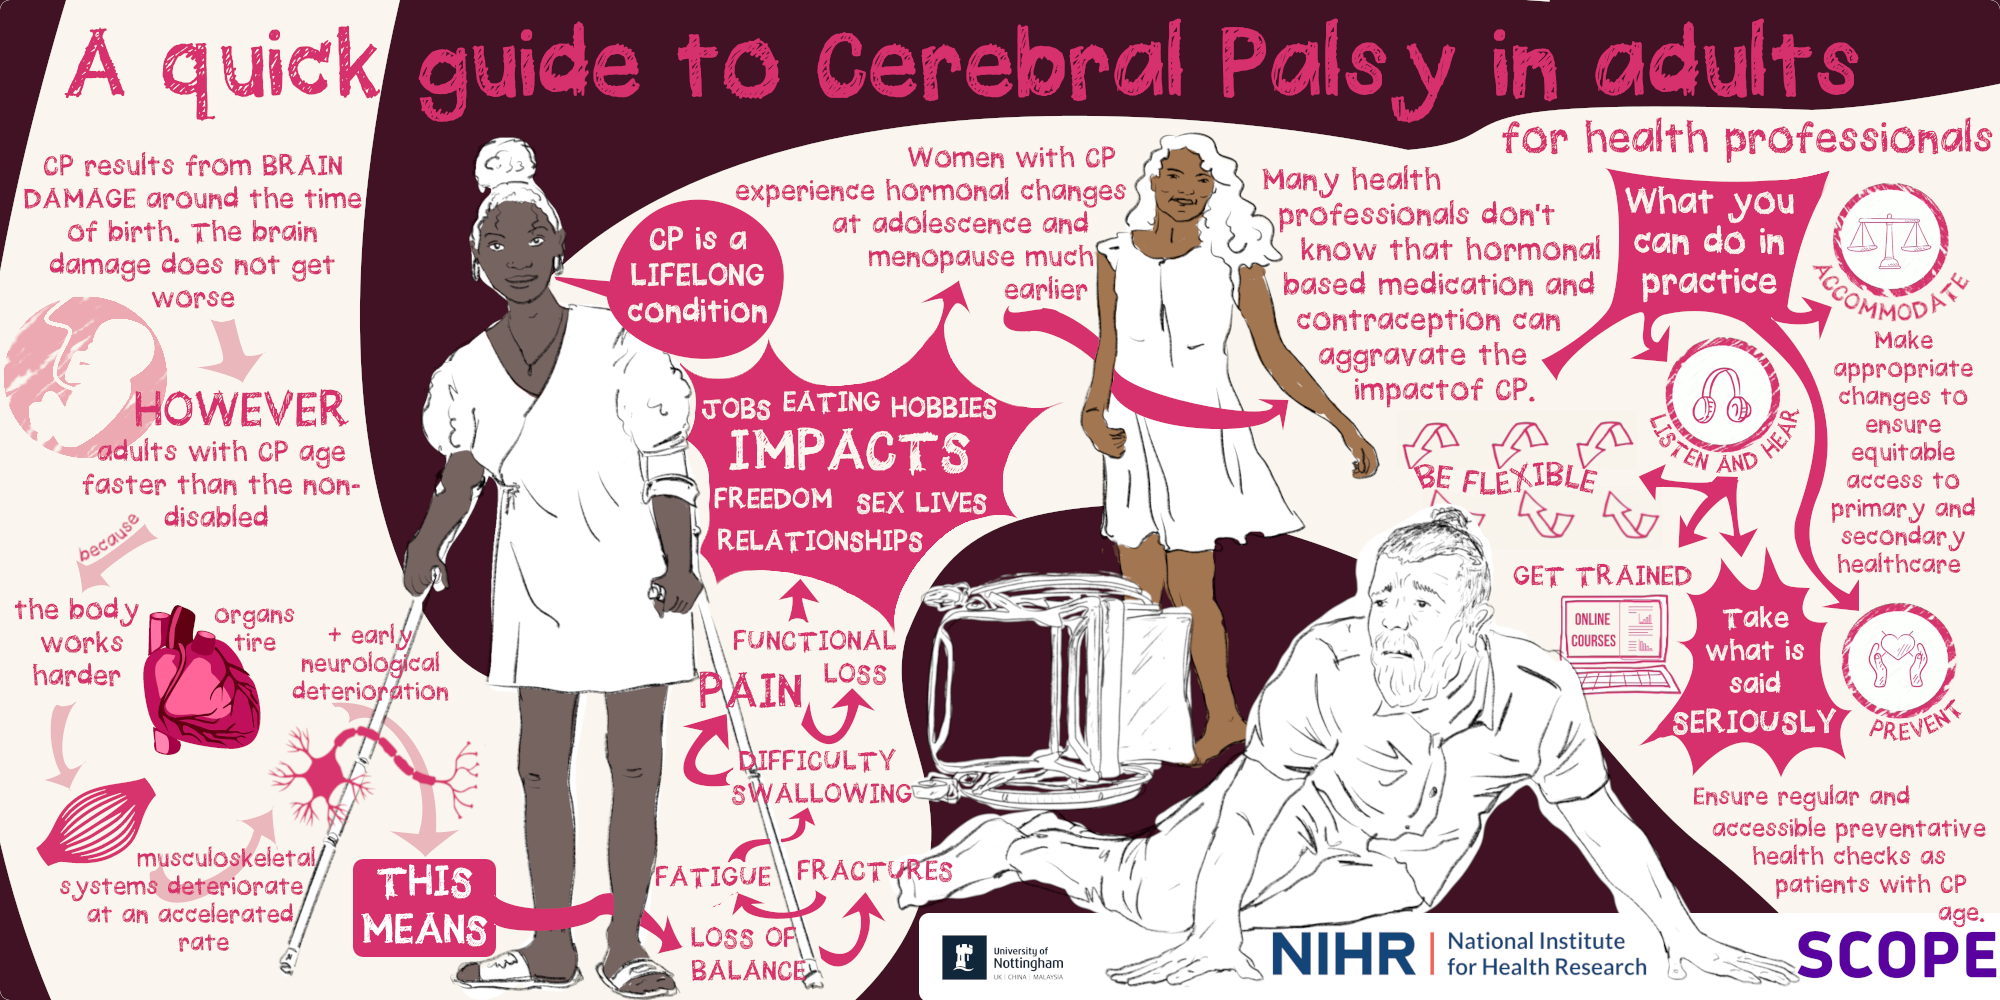 Infographic highlighting a quick guide to Cerebral Palsy in Adults